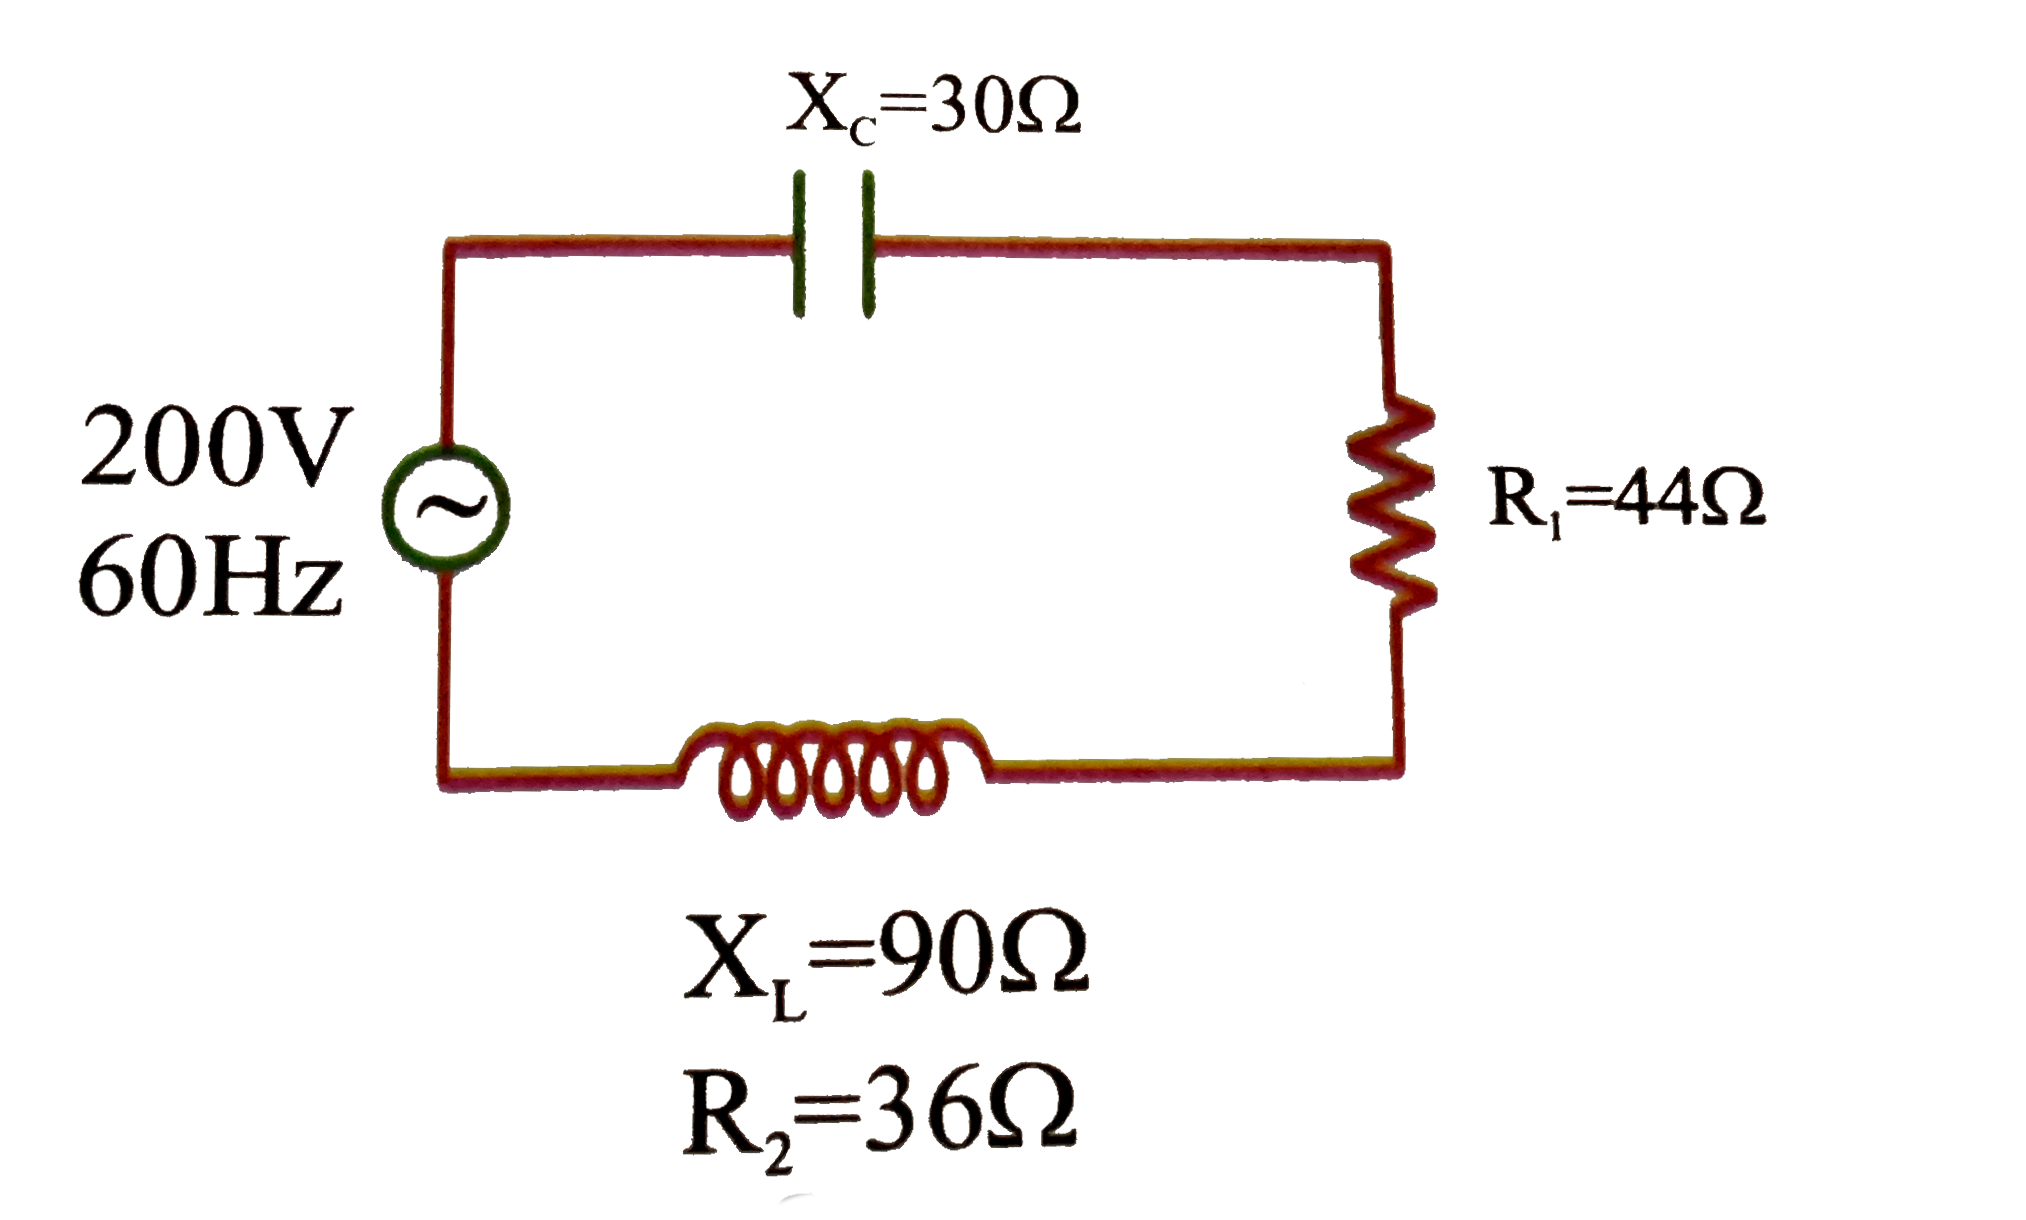 A series circuit connected across a 200 V, 60 Hz line consists of a capacitive reactance 30 Omega non inductive resistor of 44 Omega and a coil of inductive reactance 90 Omega and resistance 36 Omega as shown in the diagram       The potentail difference across the coil is